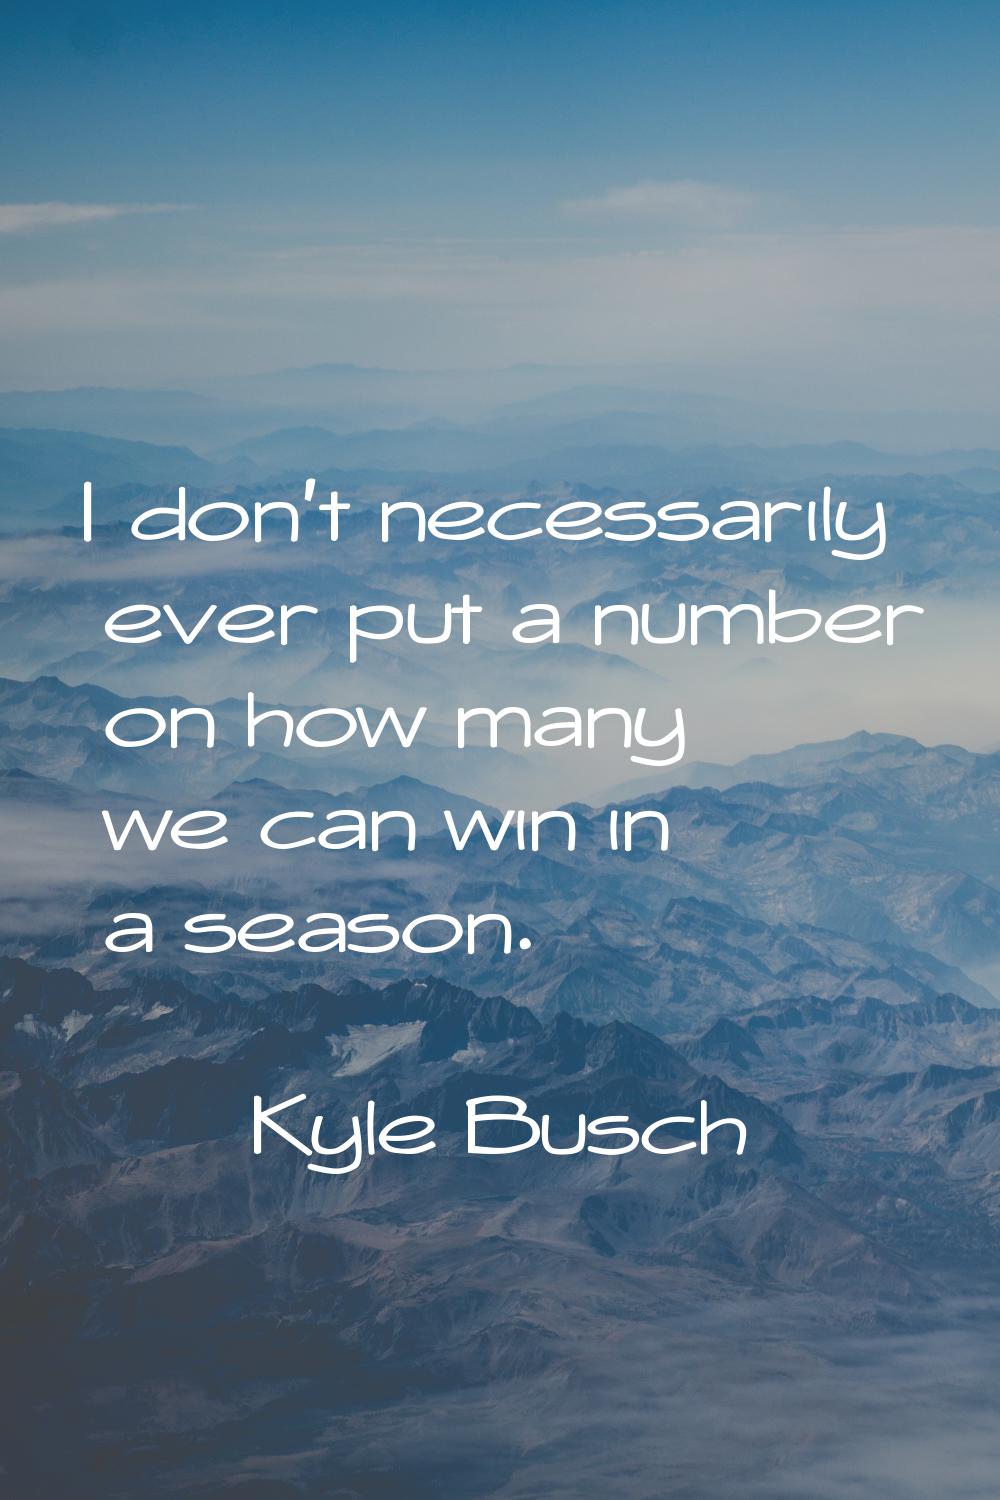 I don't necessarily ever put a number on how many we can win in a season.